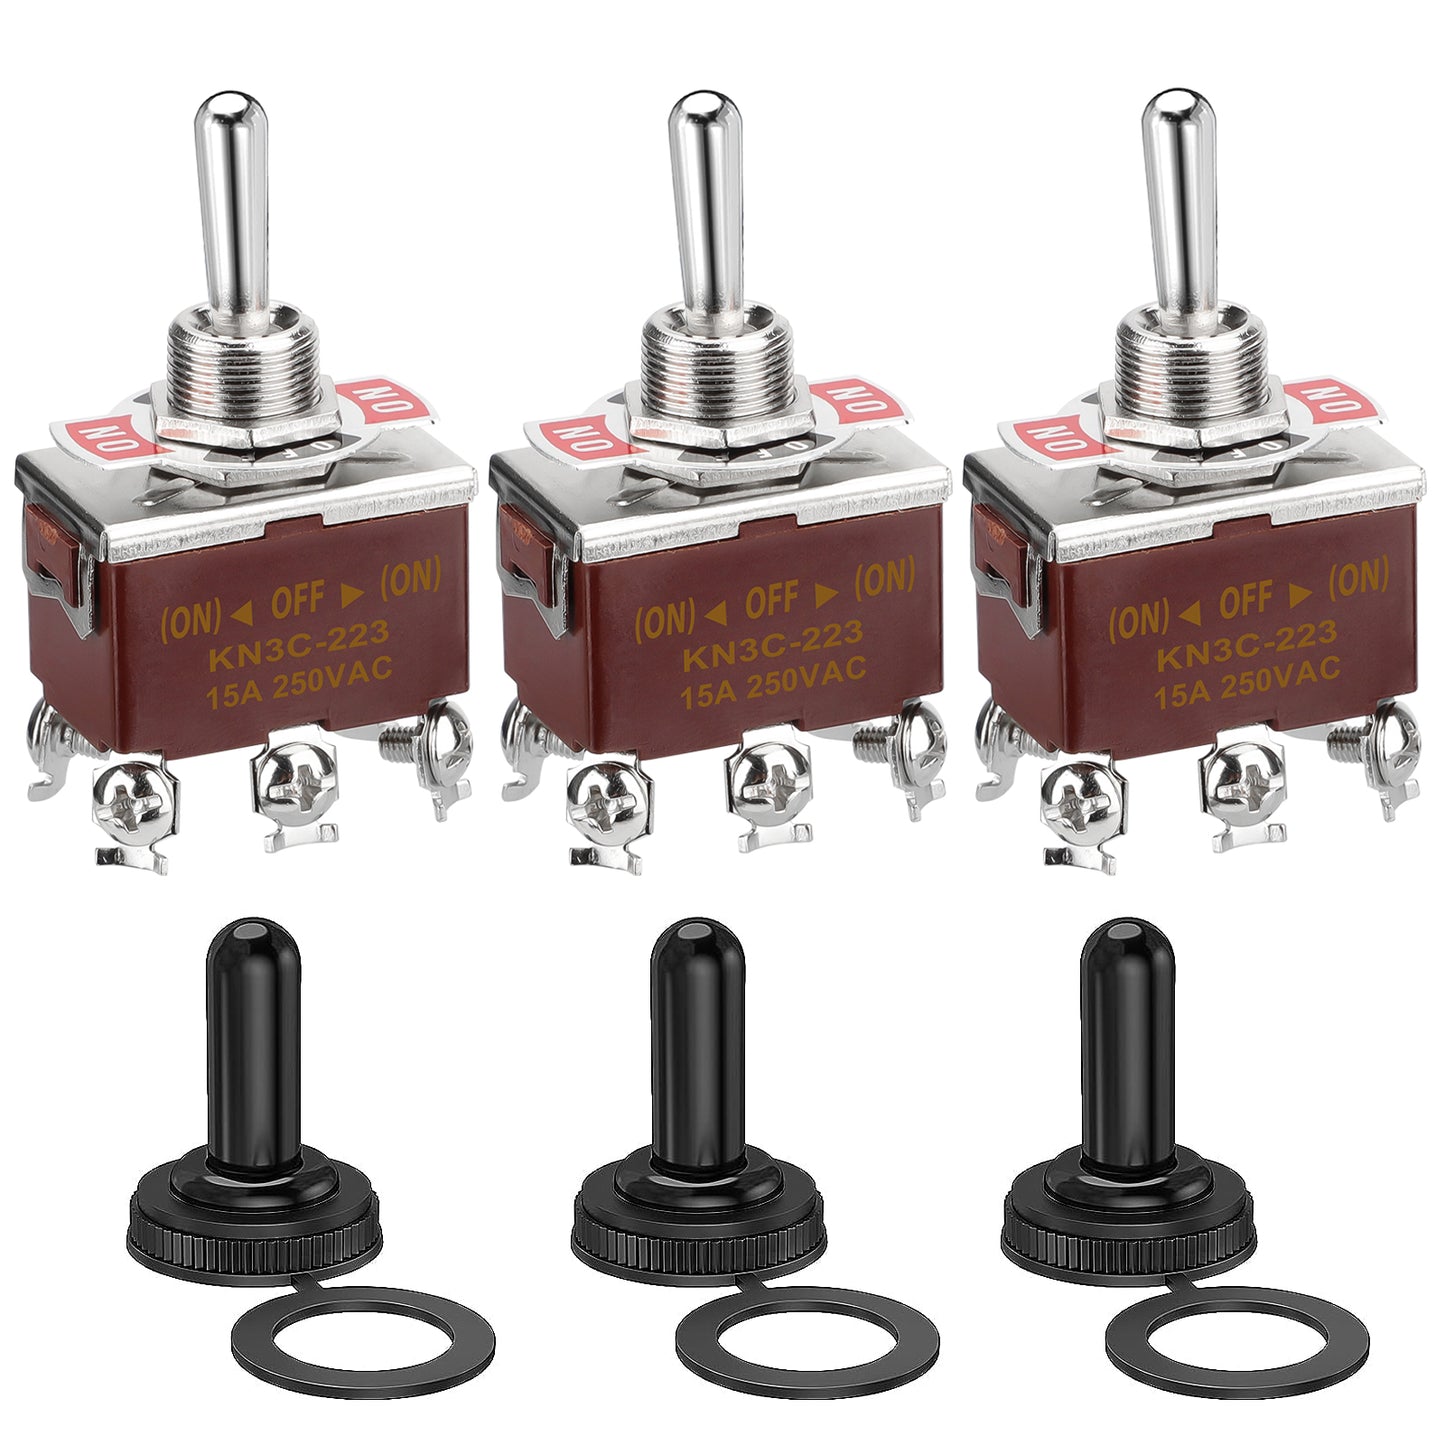 3 Pcs 12V 6 Pin 3 Position Heavy Duty Momentary Toggle Switches - IP65 Waterproof, Easy Installation, Ideal for Automotive, Boat, Yacht, and Household Appliances